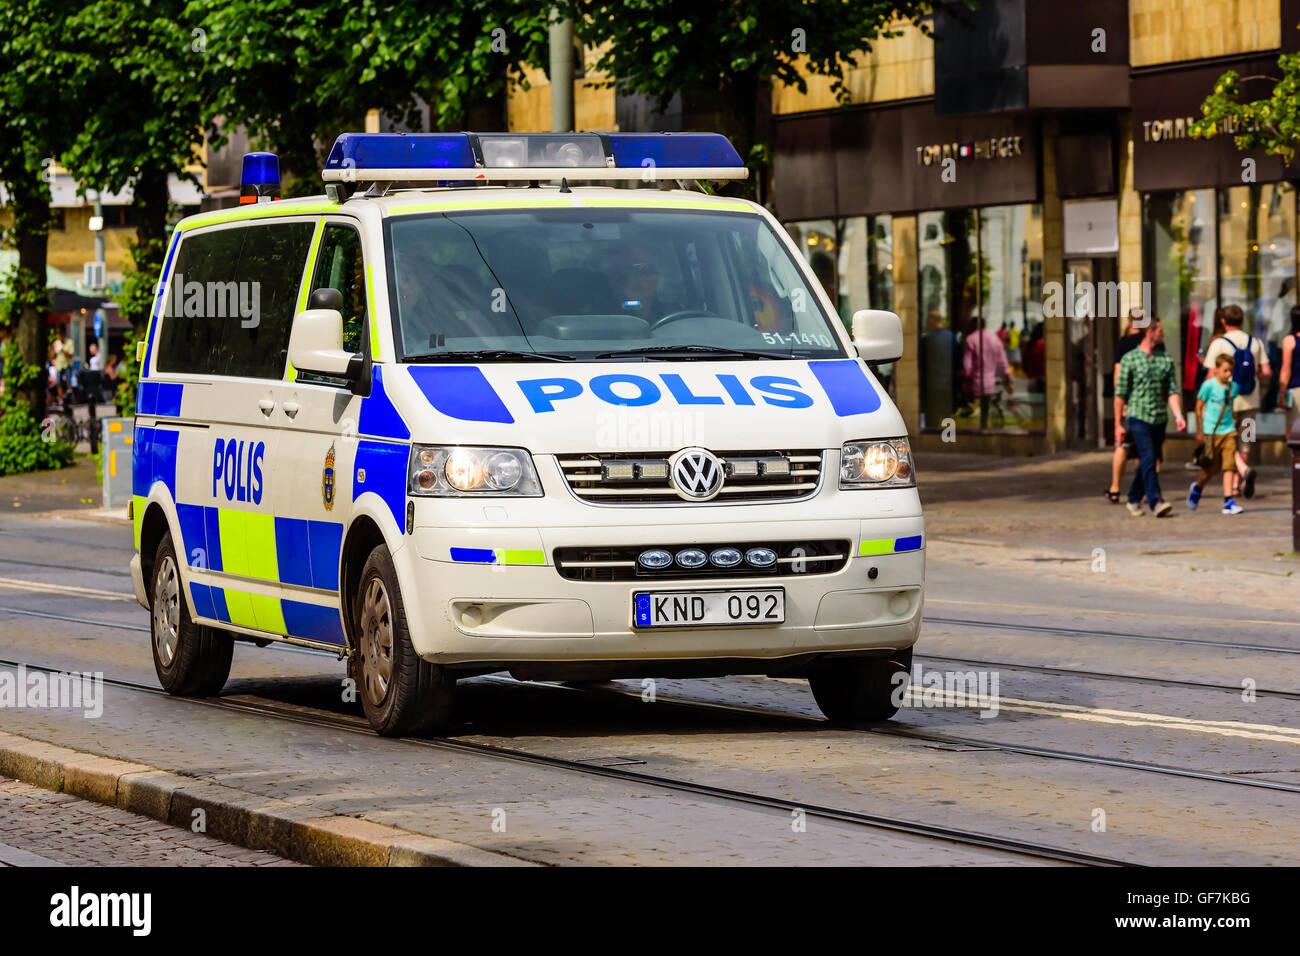 Goteborg, Sweden - July 25, 2016: 2009 VW caravelle transporter as a police car in urban environment. Stock Photo